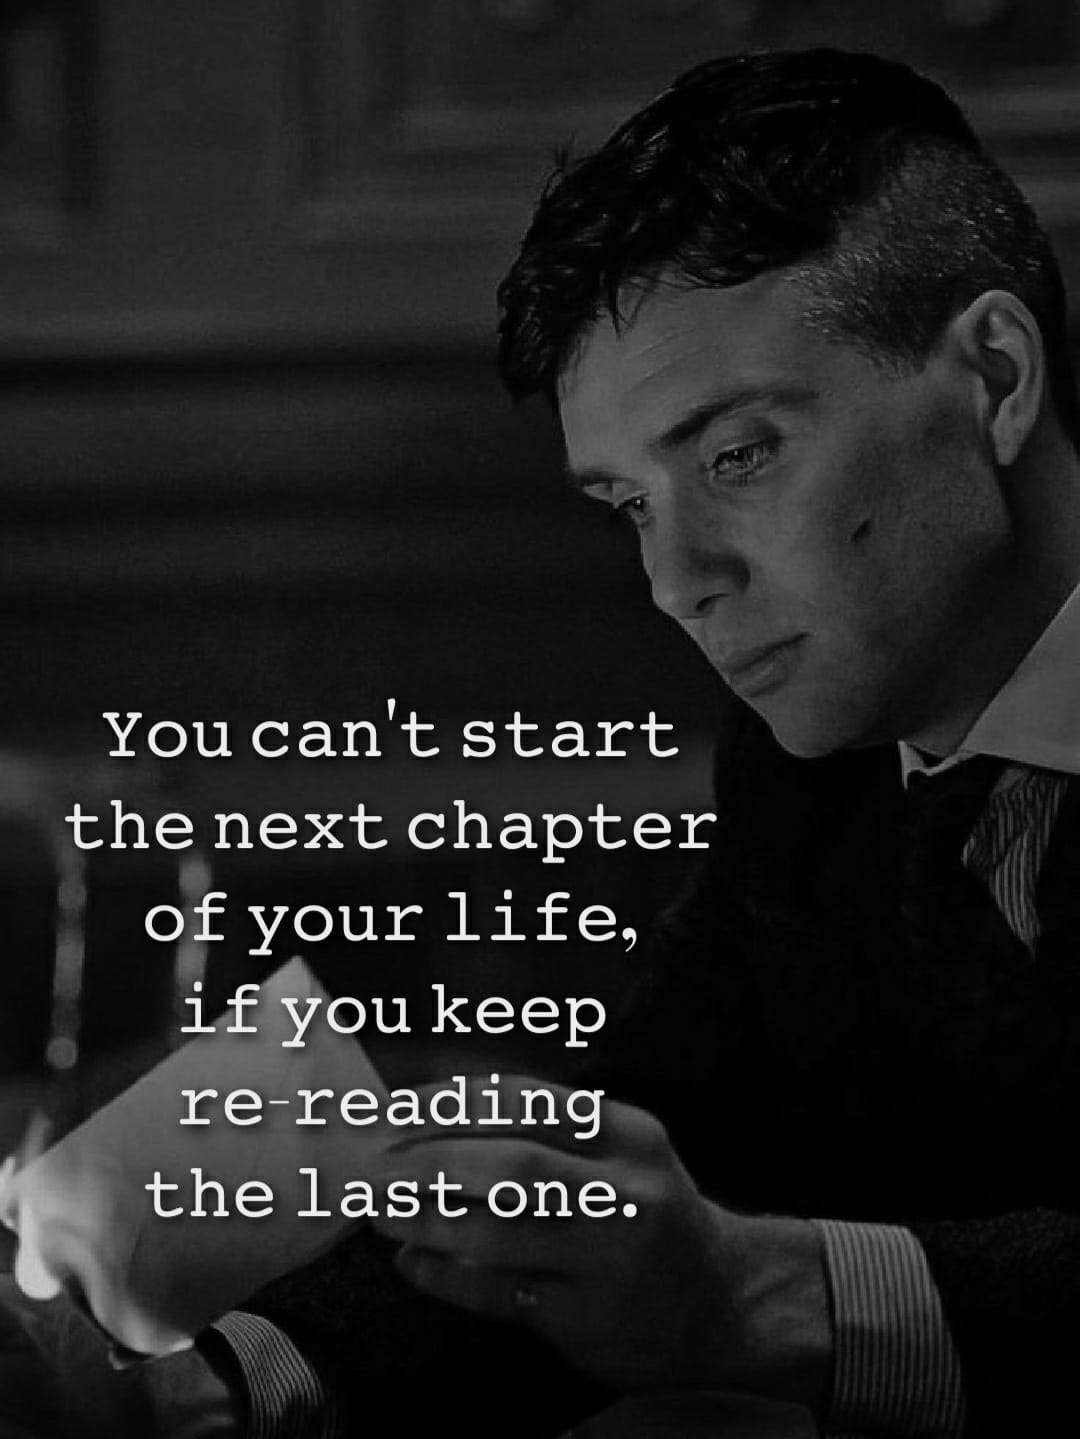 You can’t start the next chapter of your life if you keep re-reading the last one.